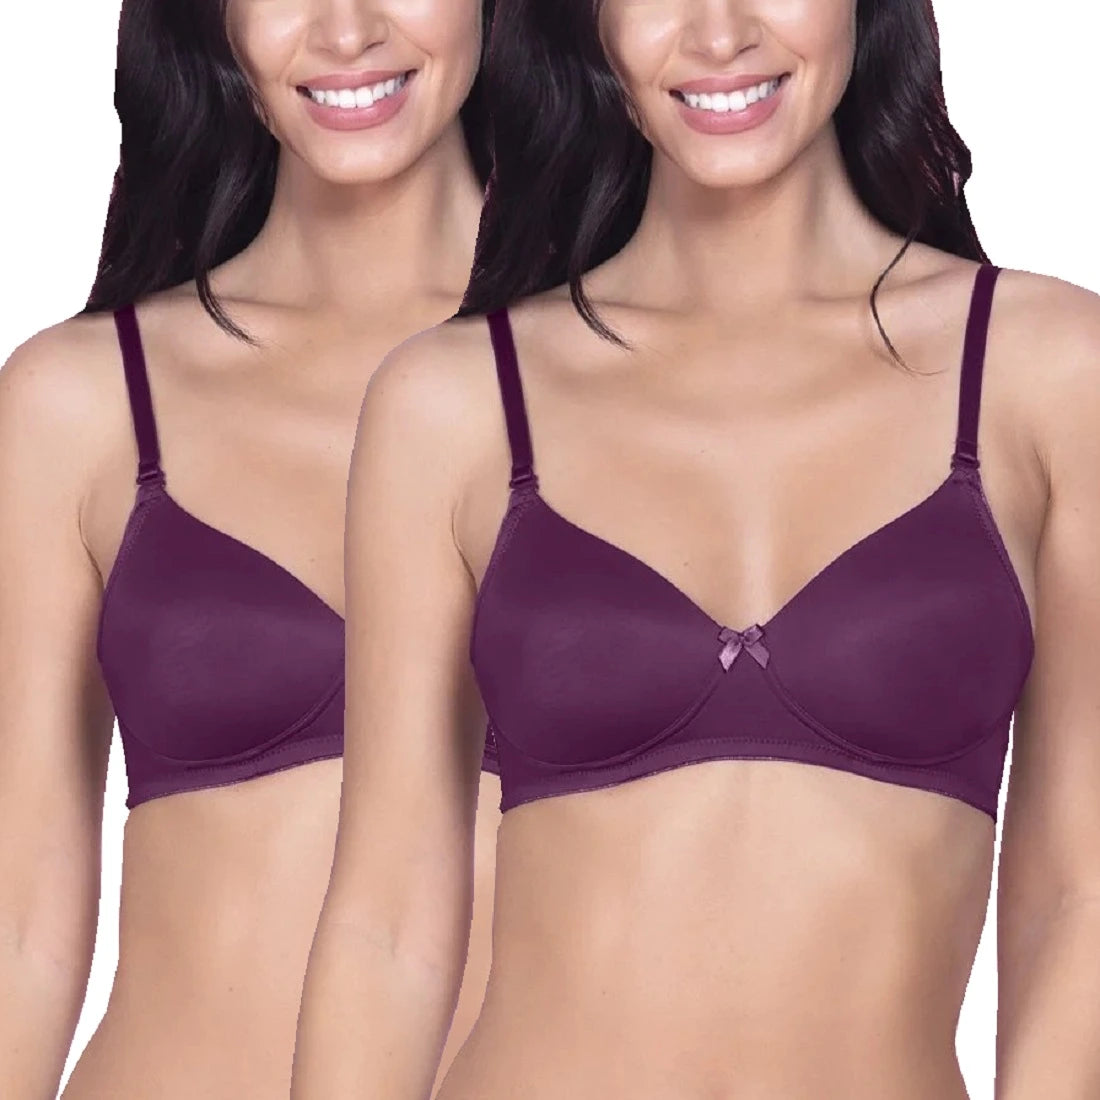 T-shirt Bras – Comfortable Wireless, Underwire Bras and More at